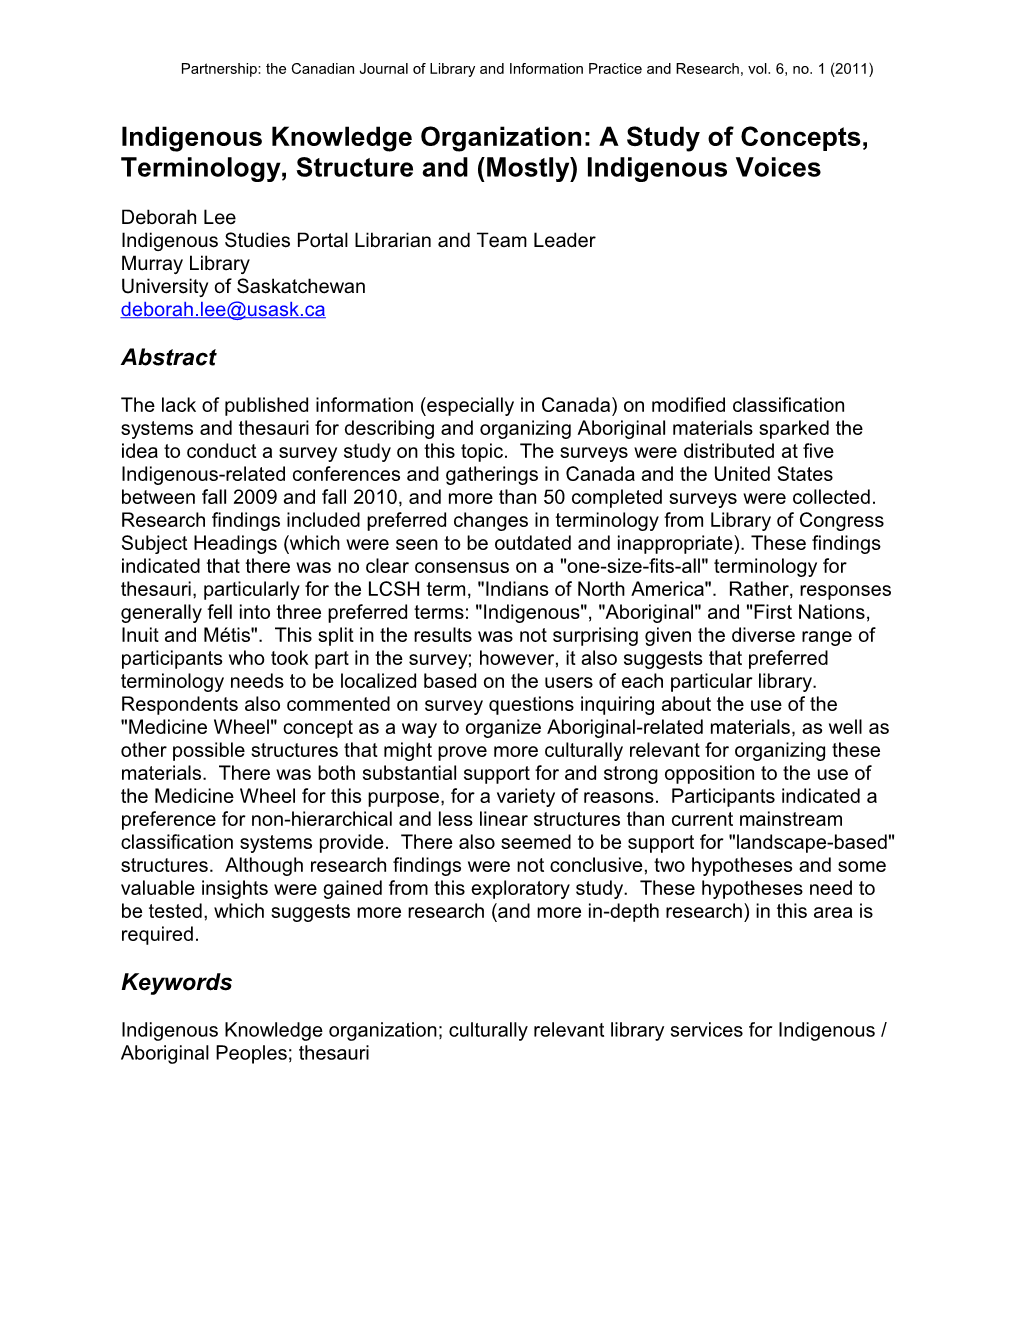 Indigenous Knowledge Organization: a Study of Concepts, Terminology, Structure and (Mostly) Indigenous Voices